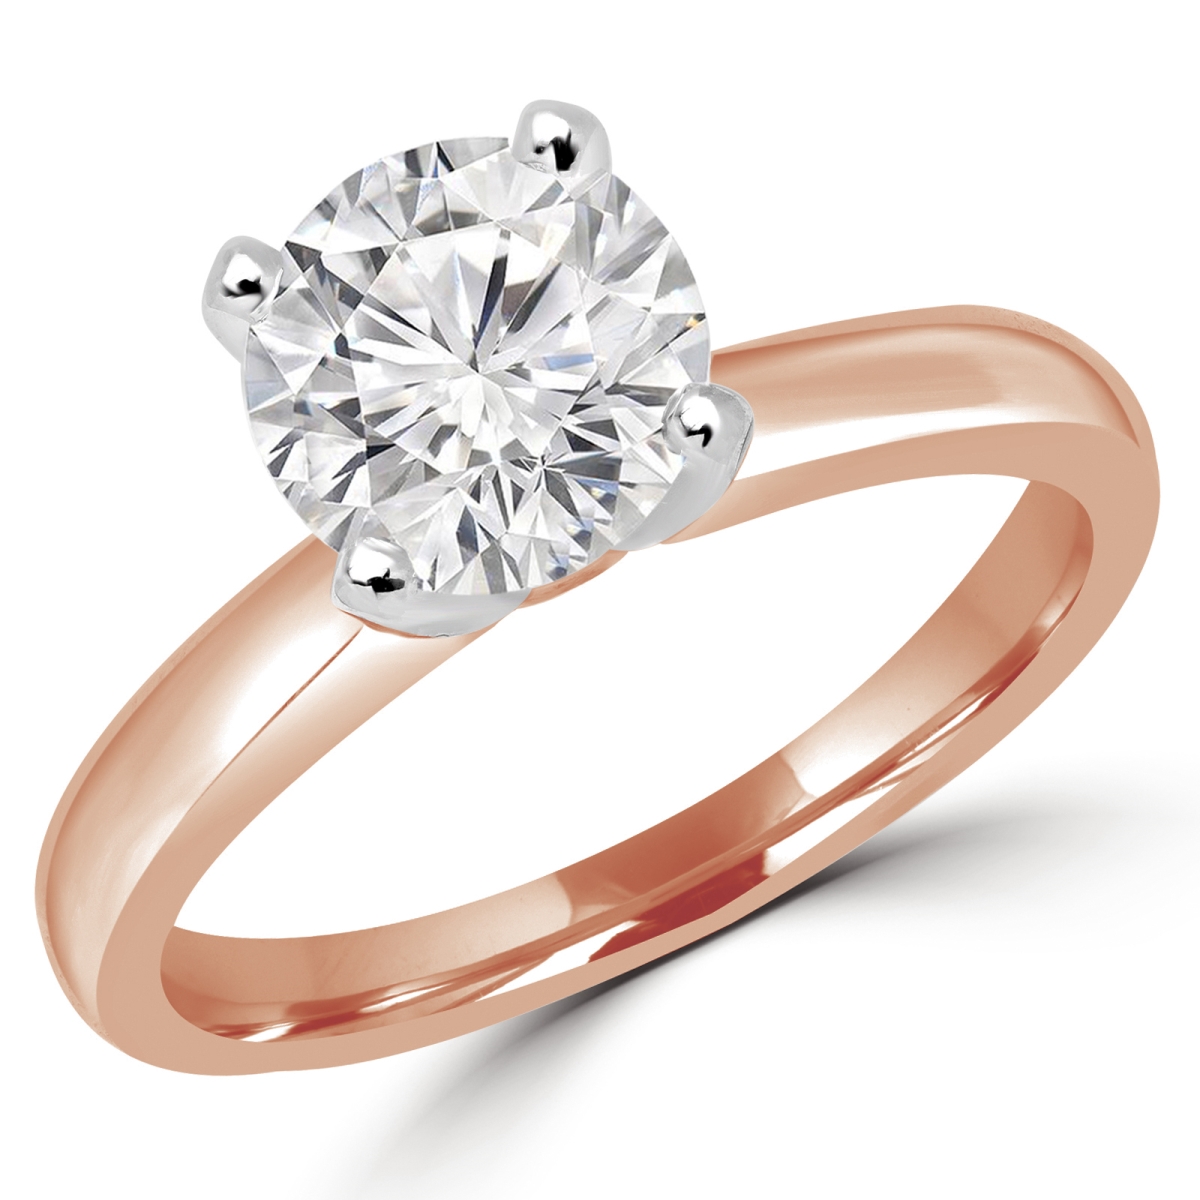 Picture of Majesty Diamonds MD180009-8.75 0.6 CT Round Diamond Solitaire Engagement Ring in 14K Rose Gold - Size 8.75